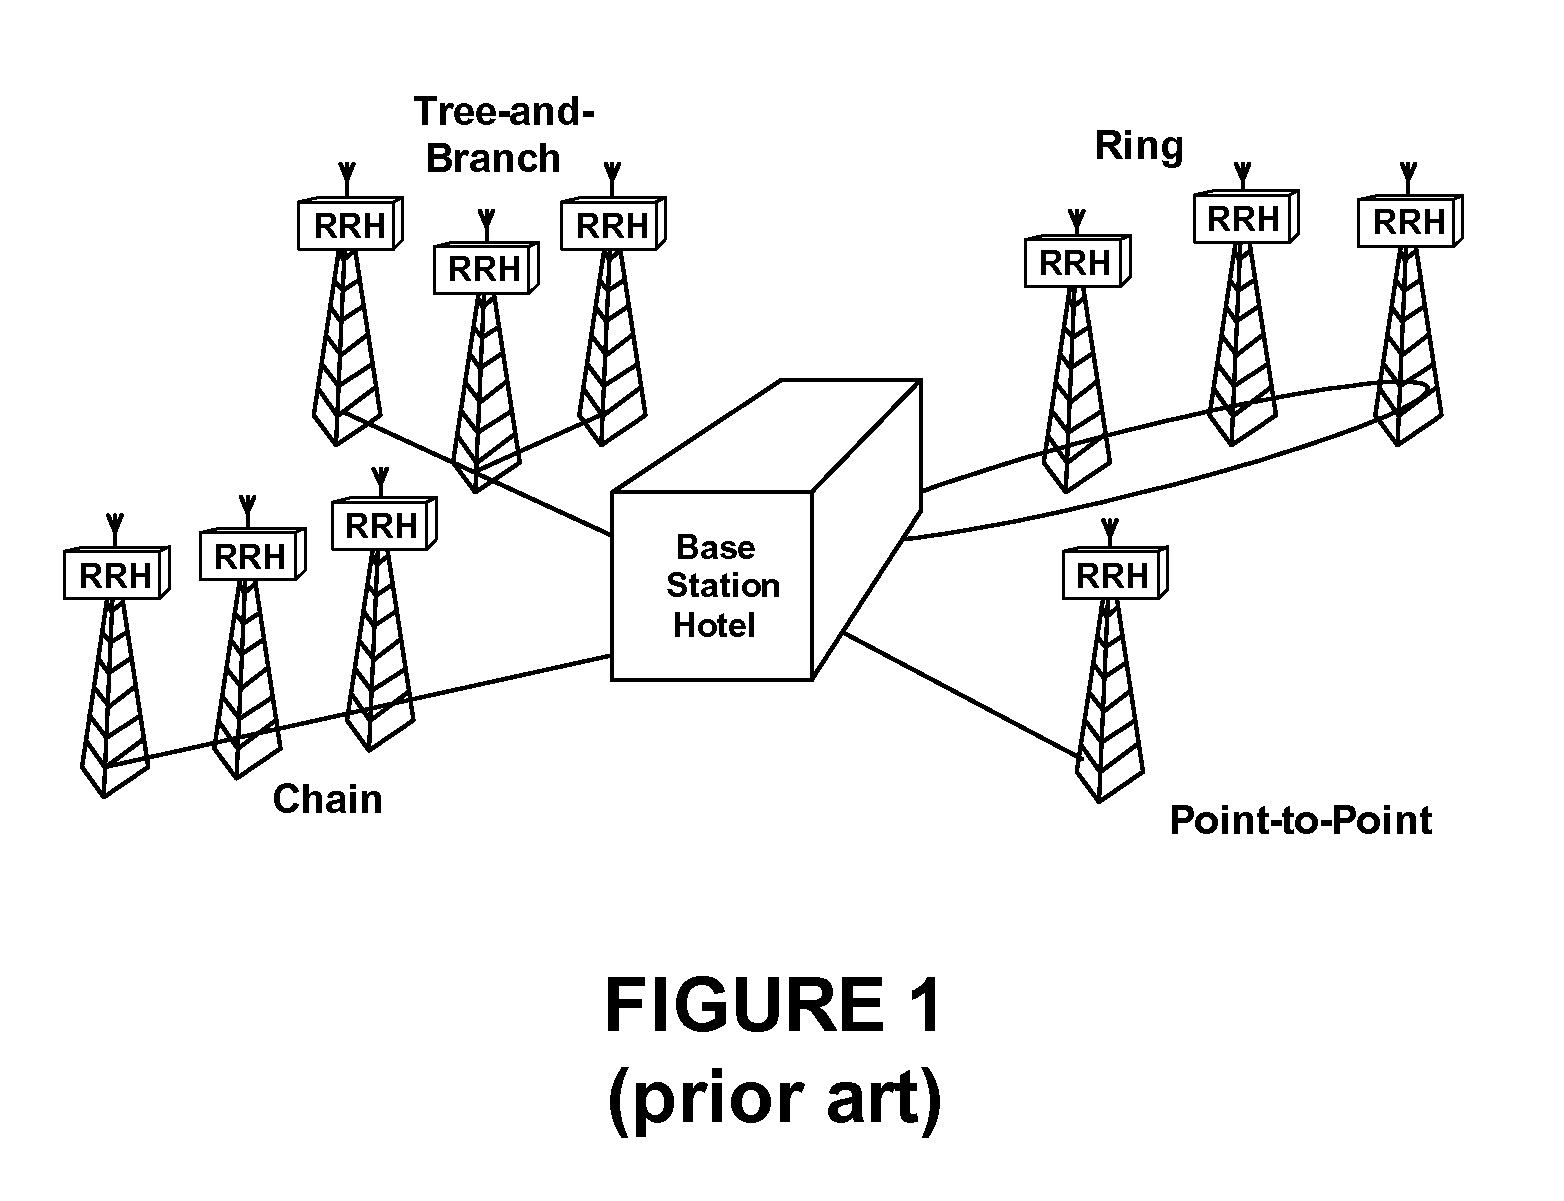 Delay measurements and calibration methods and apparatus for distributed wireless systems